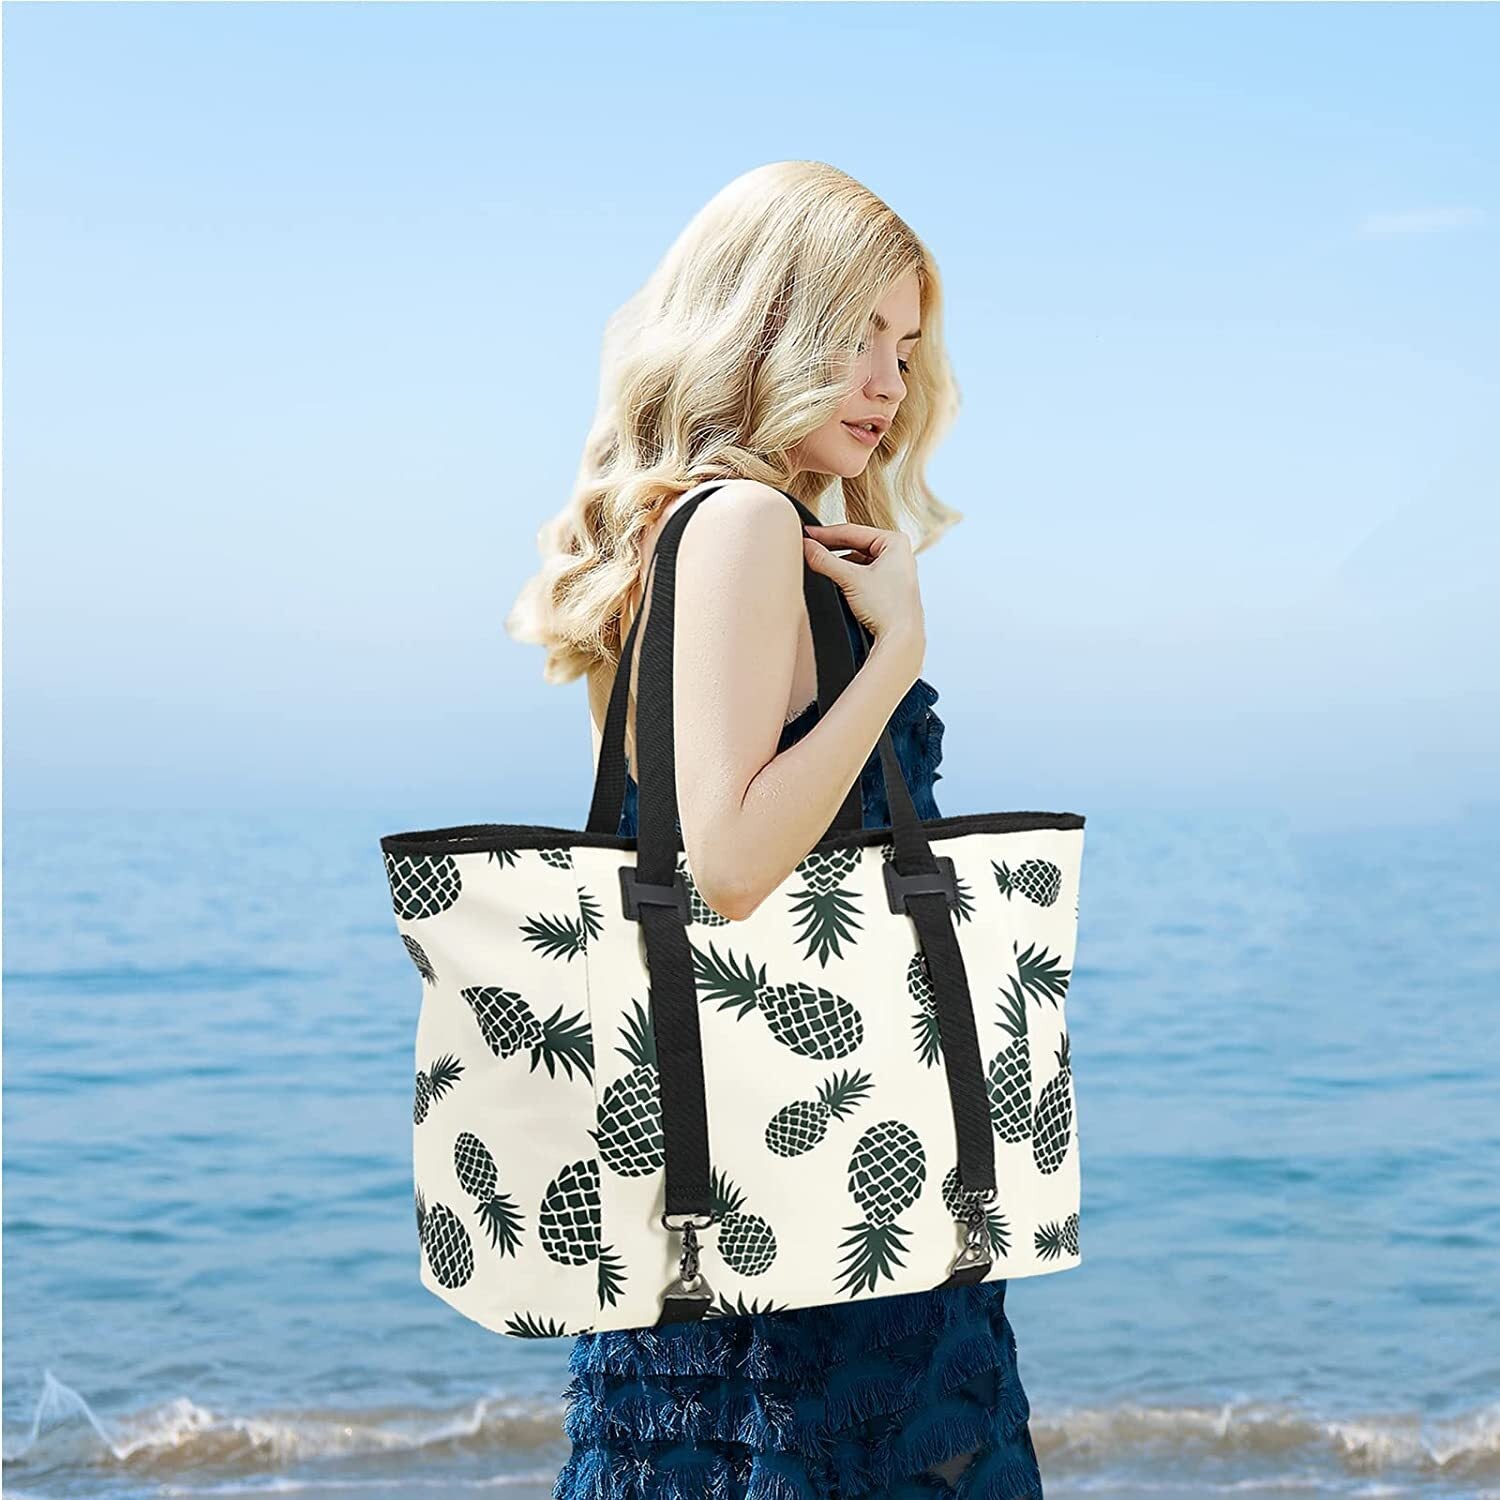 Best Tote Bags For a Beach Party | ToteBagFactory